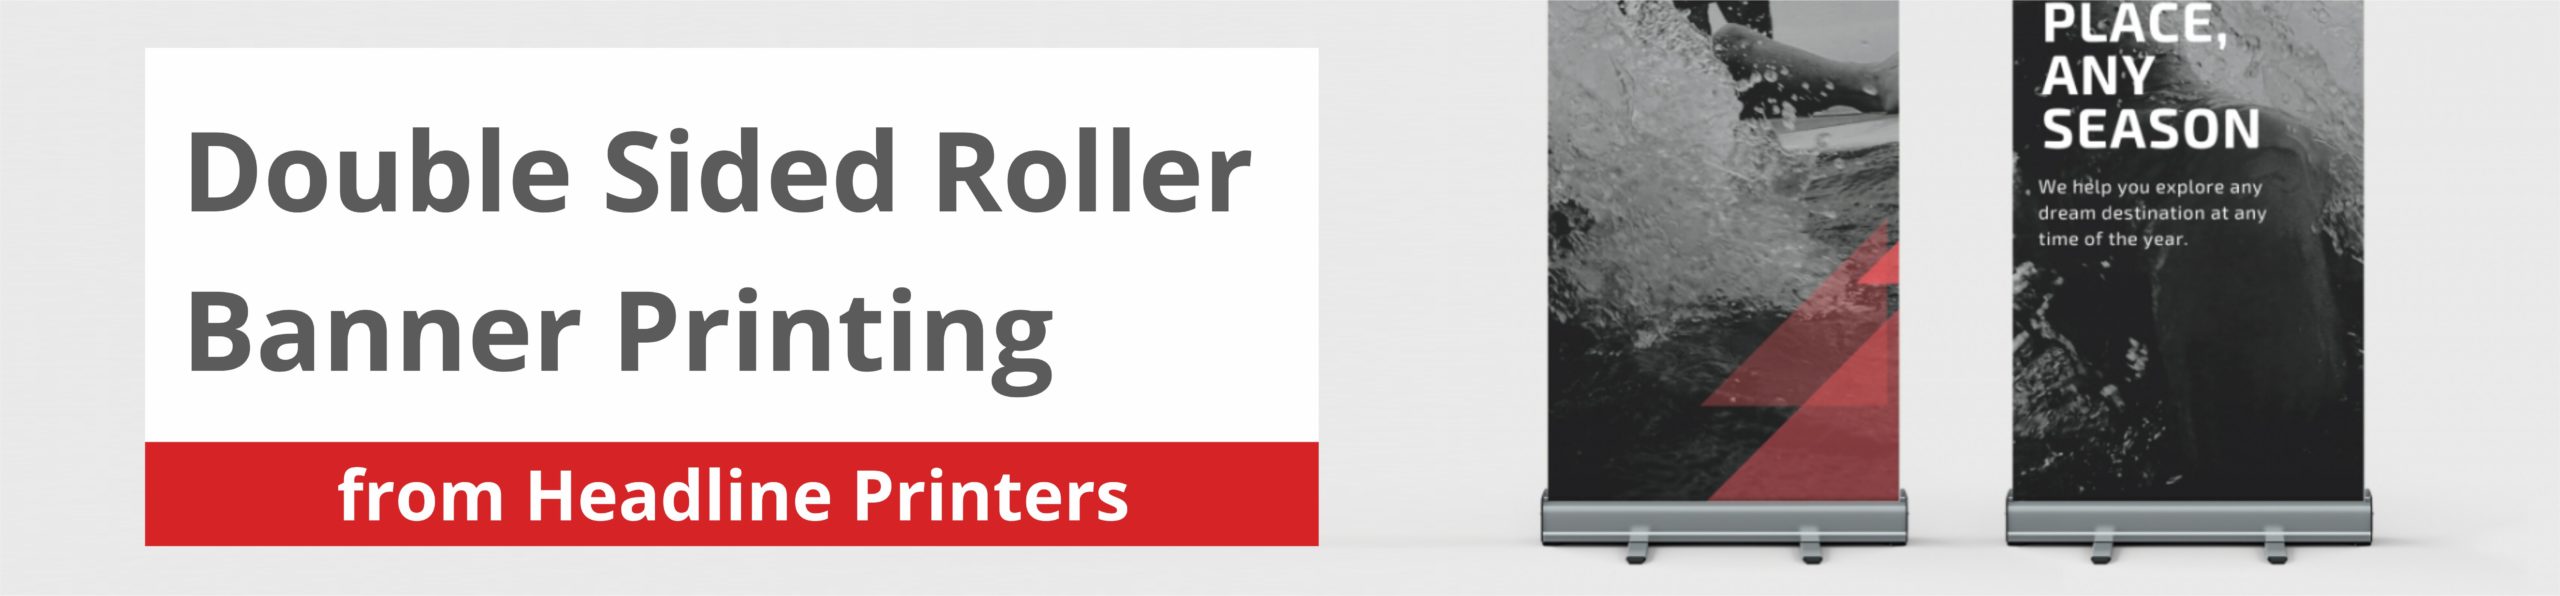 Double Sided Roller Baner